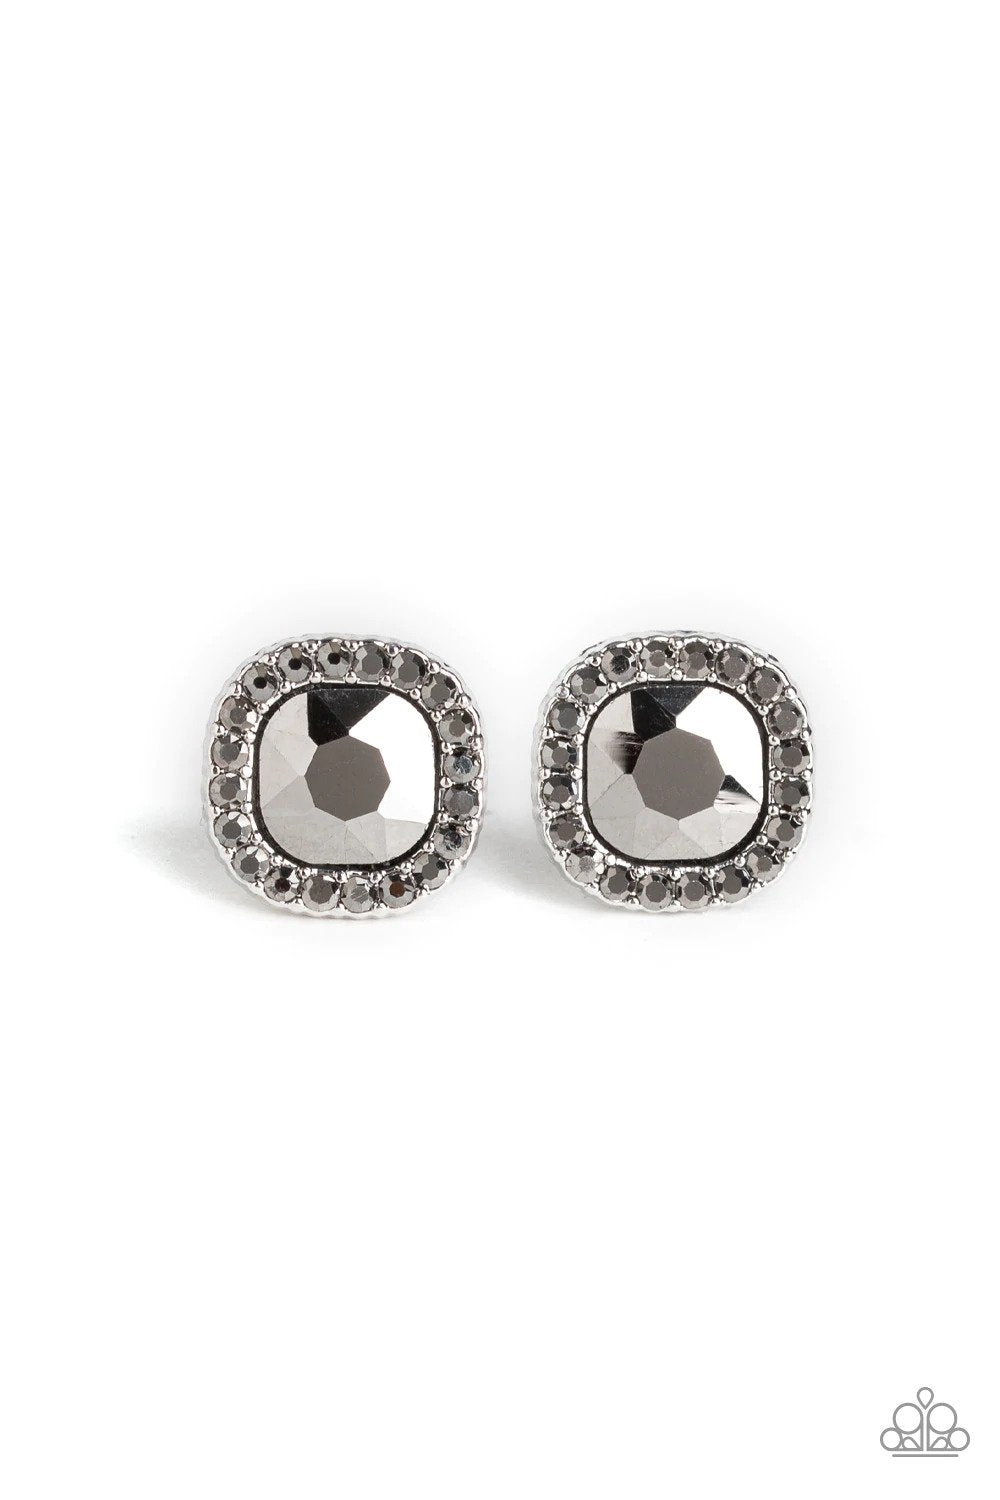 Bling Tastic! Silver Earrings - Paparazzi Accessories- lightbox - CarasShop.com - $5 Jewelry by Cara Jewels